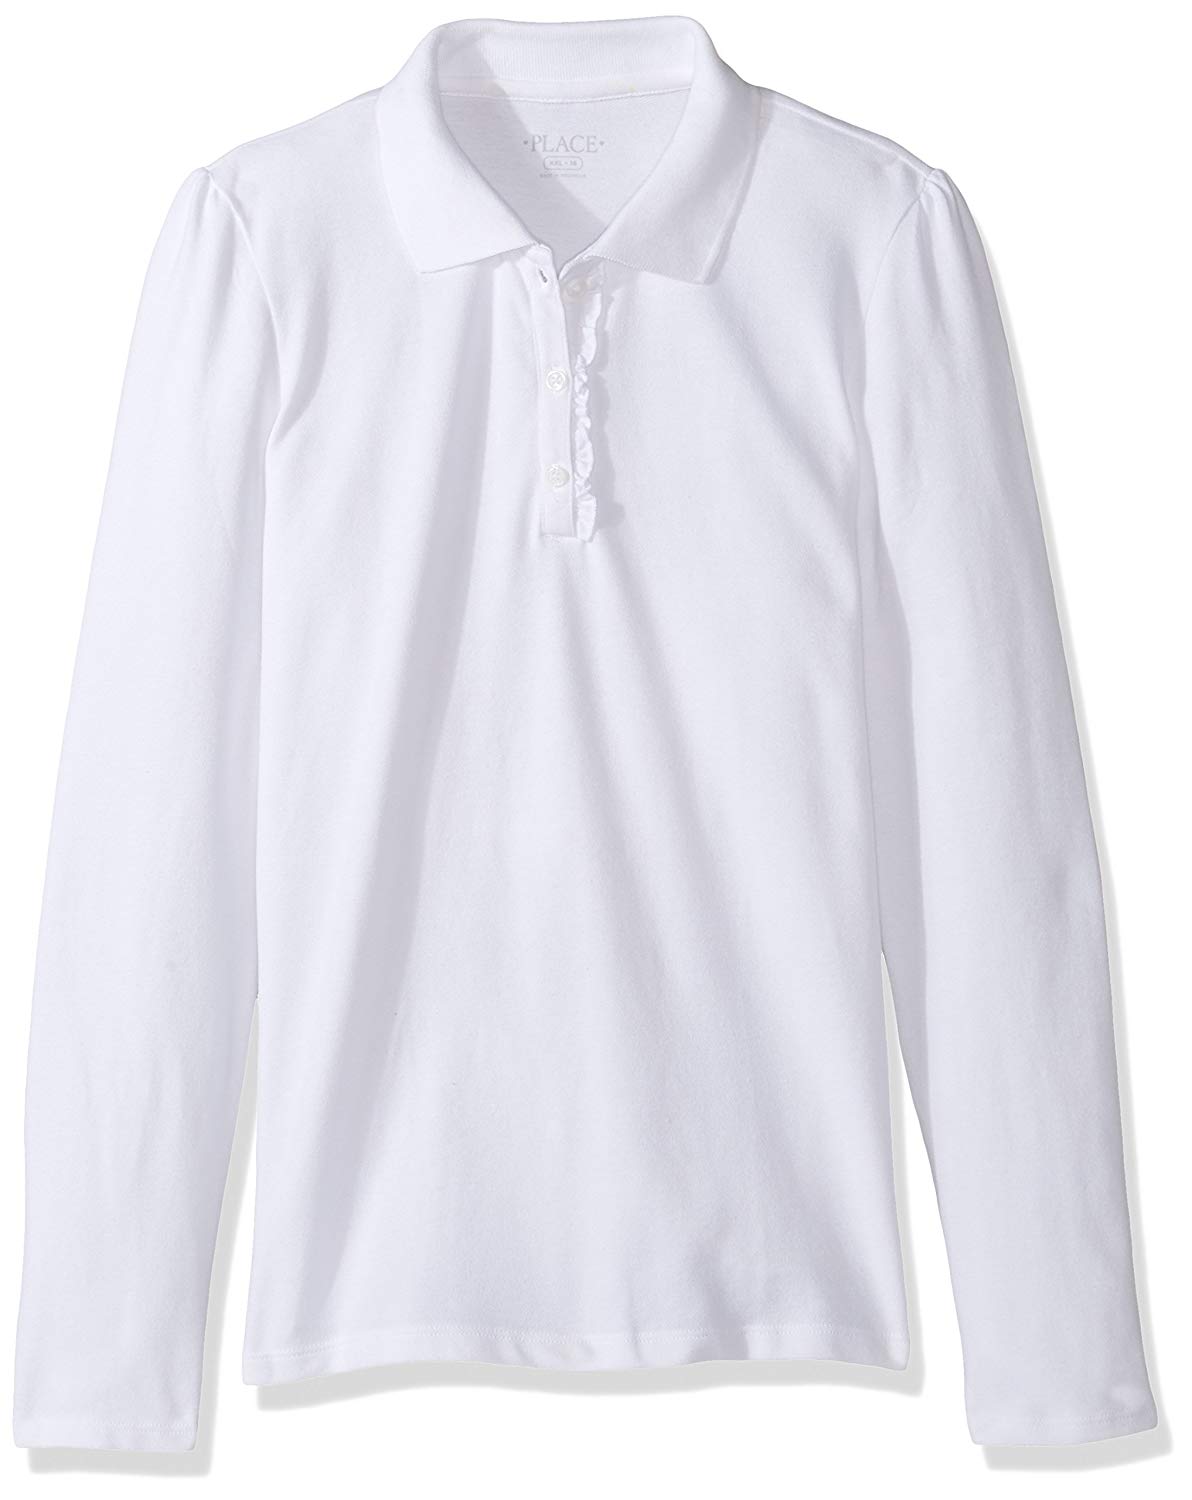 The Childrens Place Girls Long Sleeve Ruffle Polo